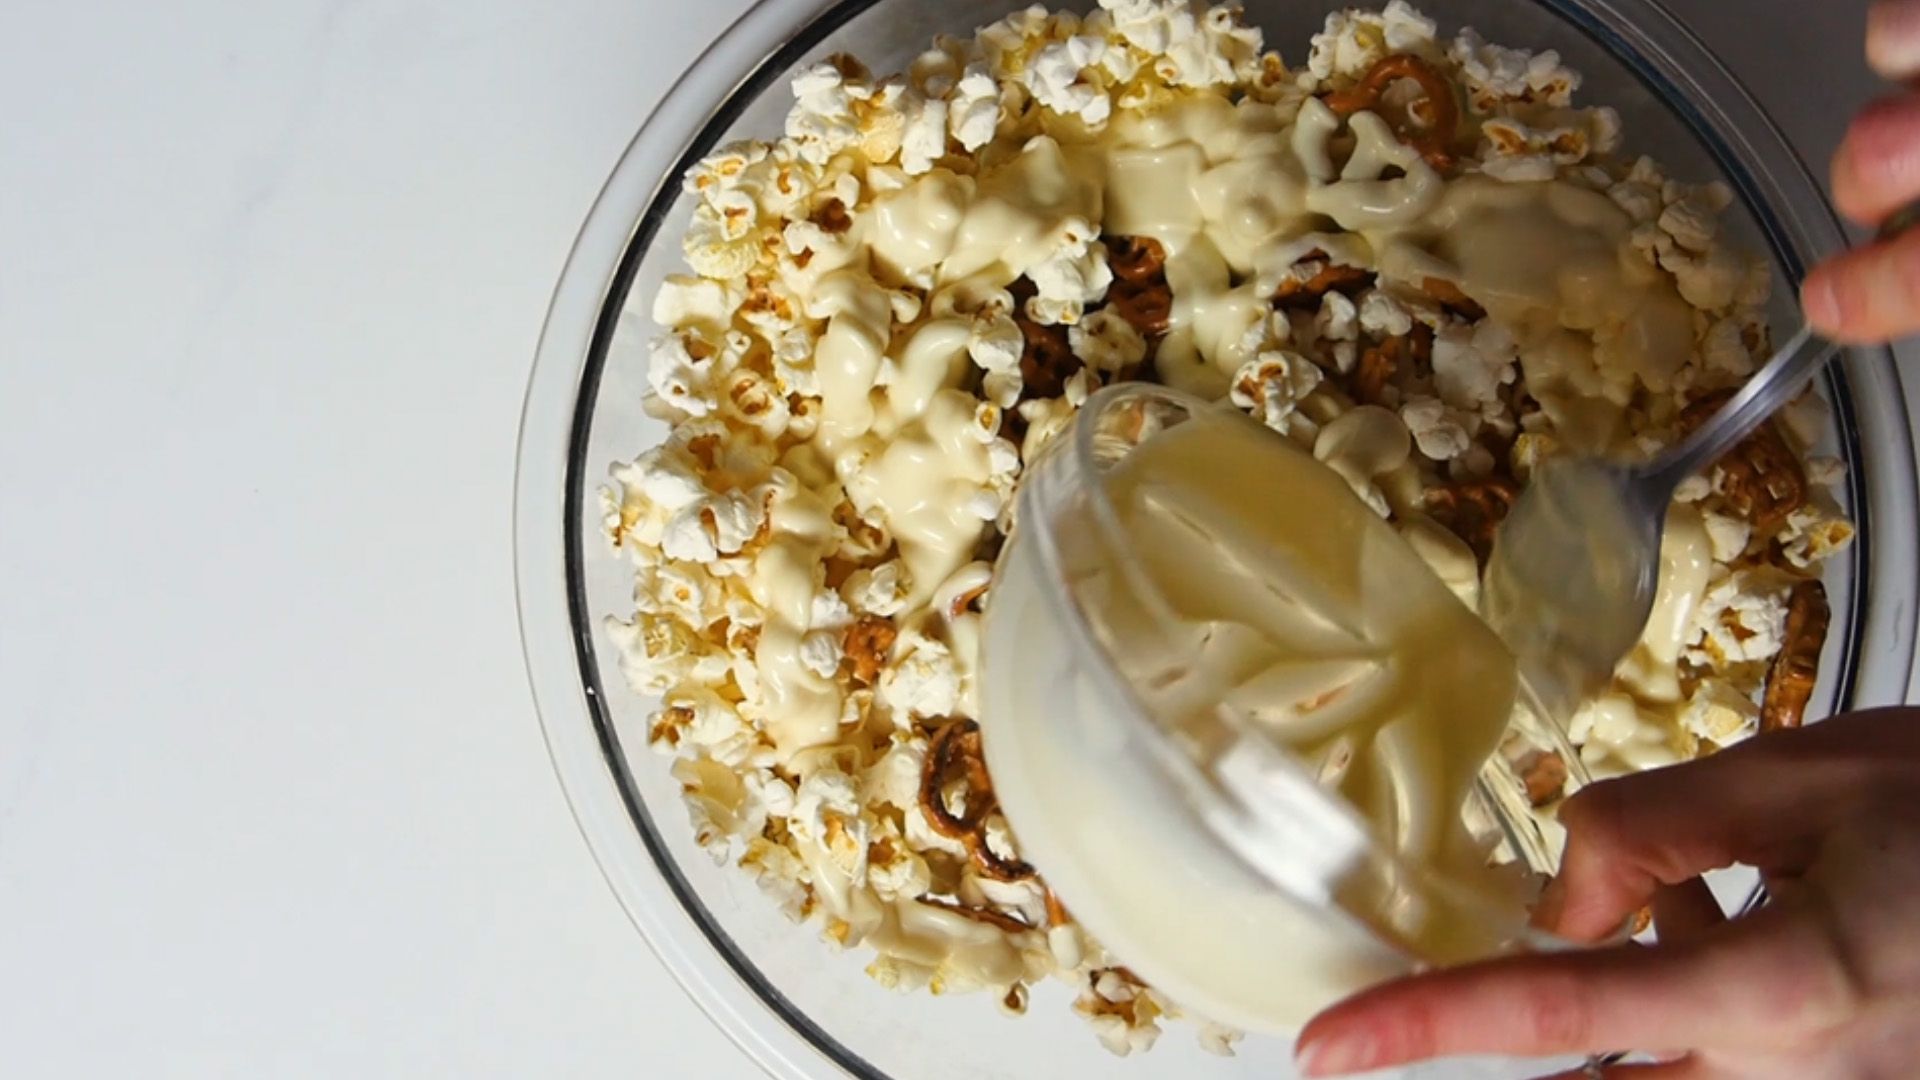 white chocolate being poured onto popcorn and pretzels